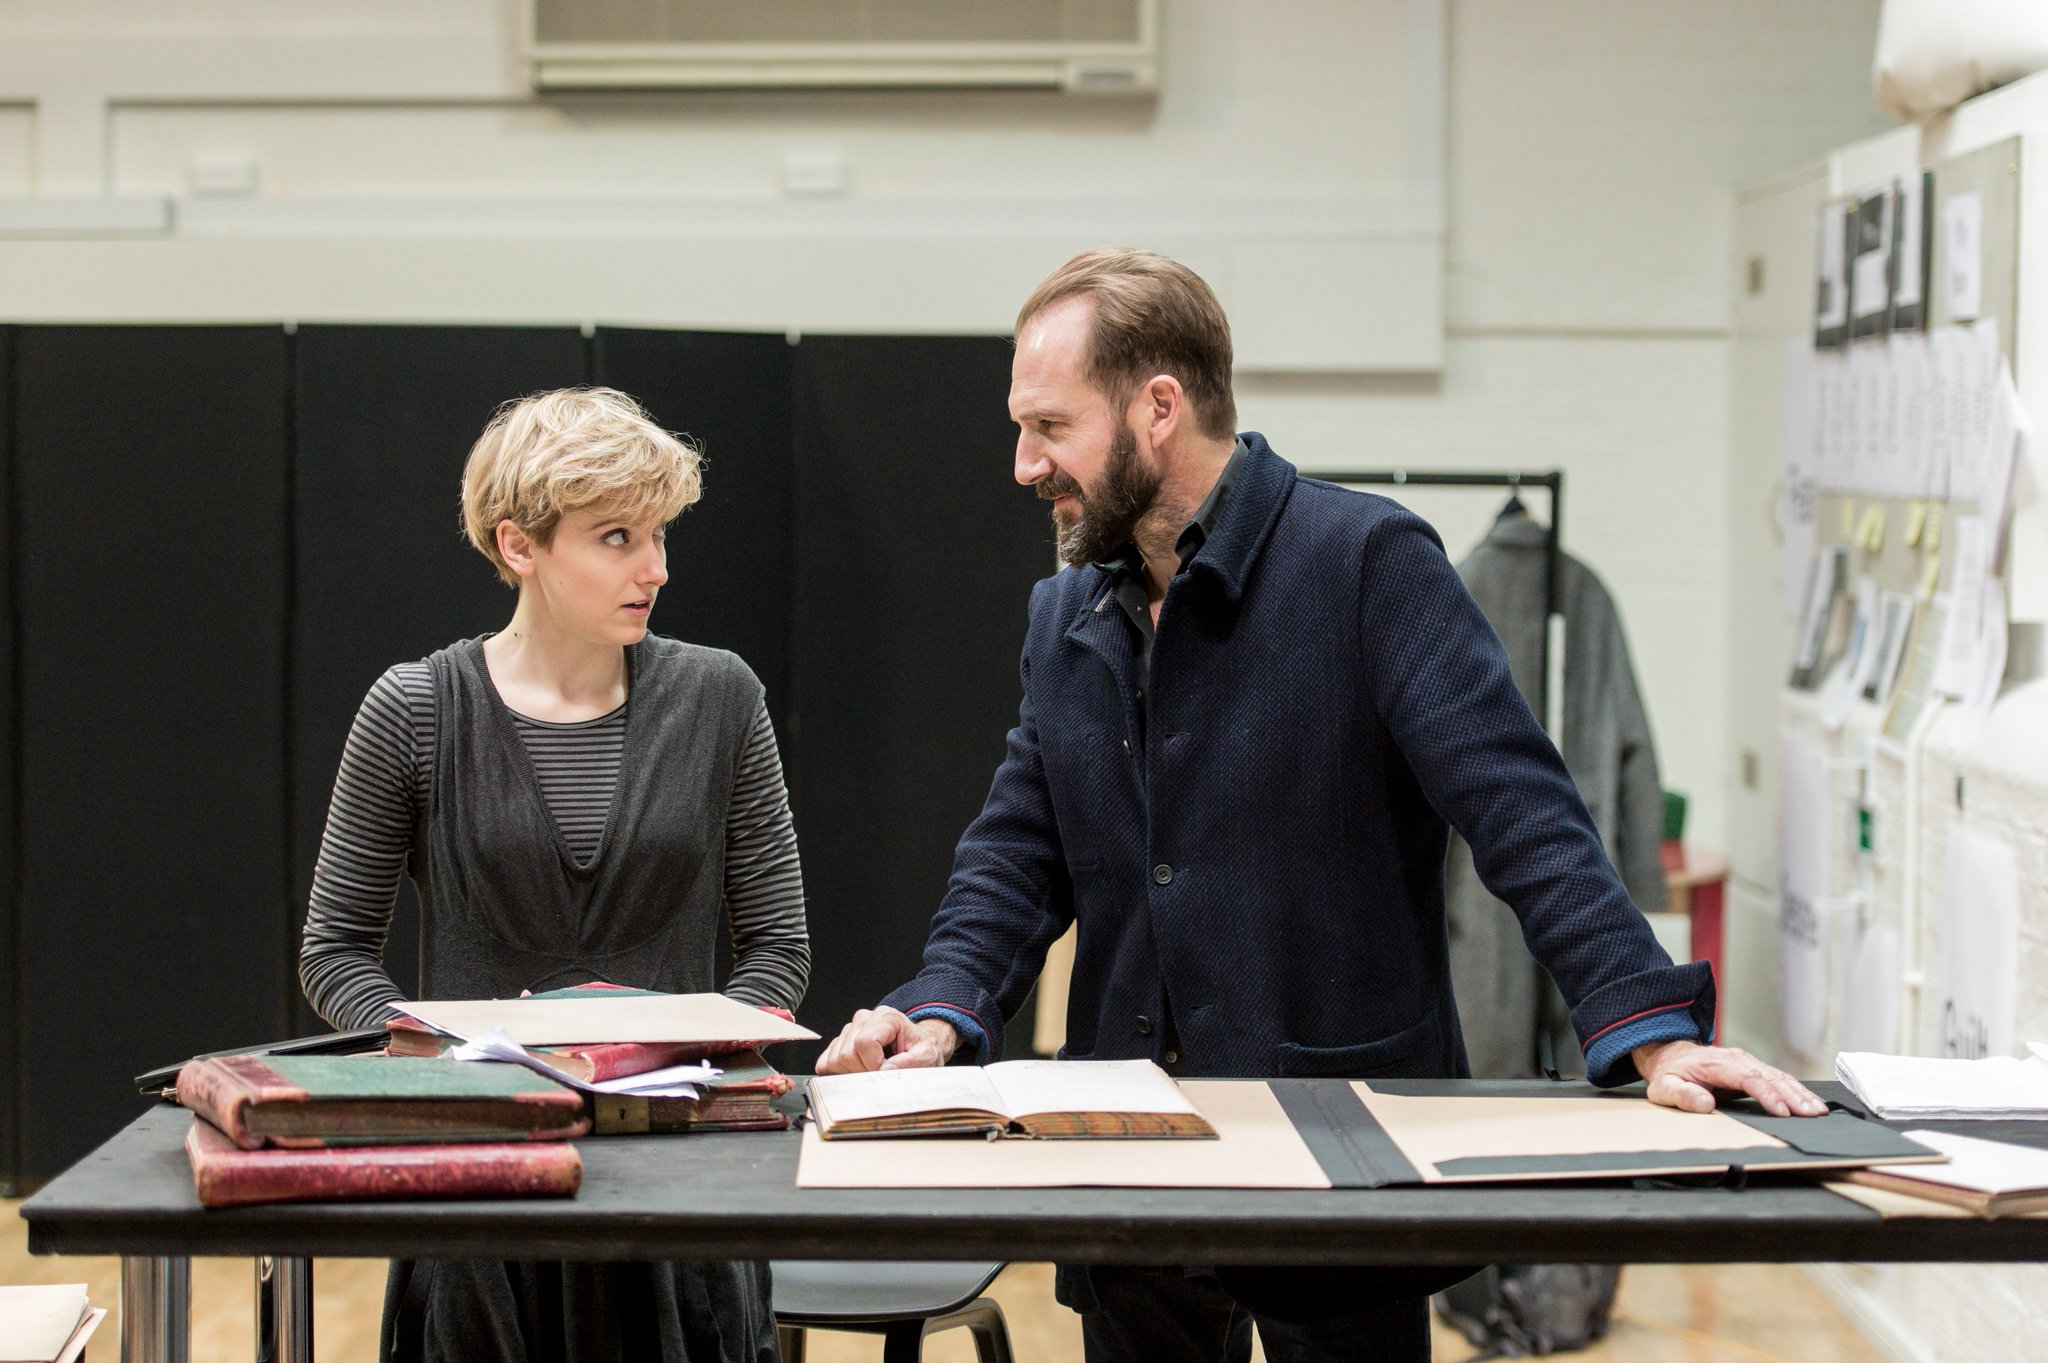 Happy Birthday to Ralph Fiennes! To celebrate: some shots of The Master Builder rehearsals  